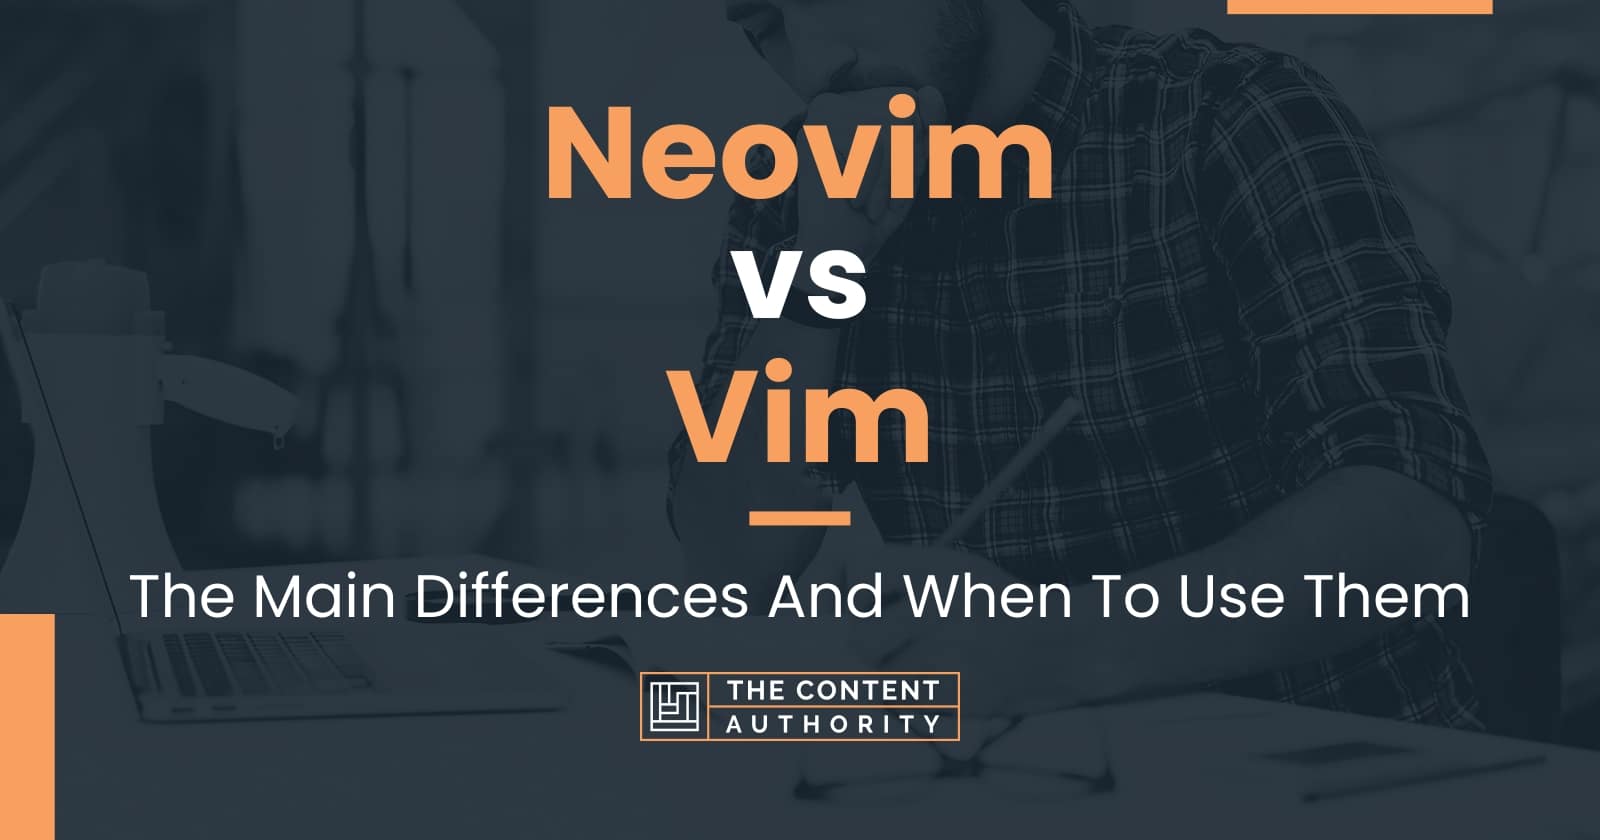 Neovim vs Vim The Main Differences And When To Use Them